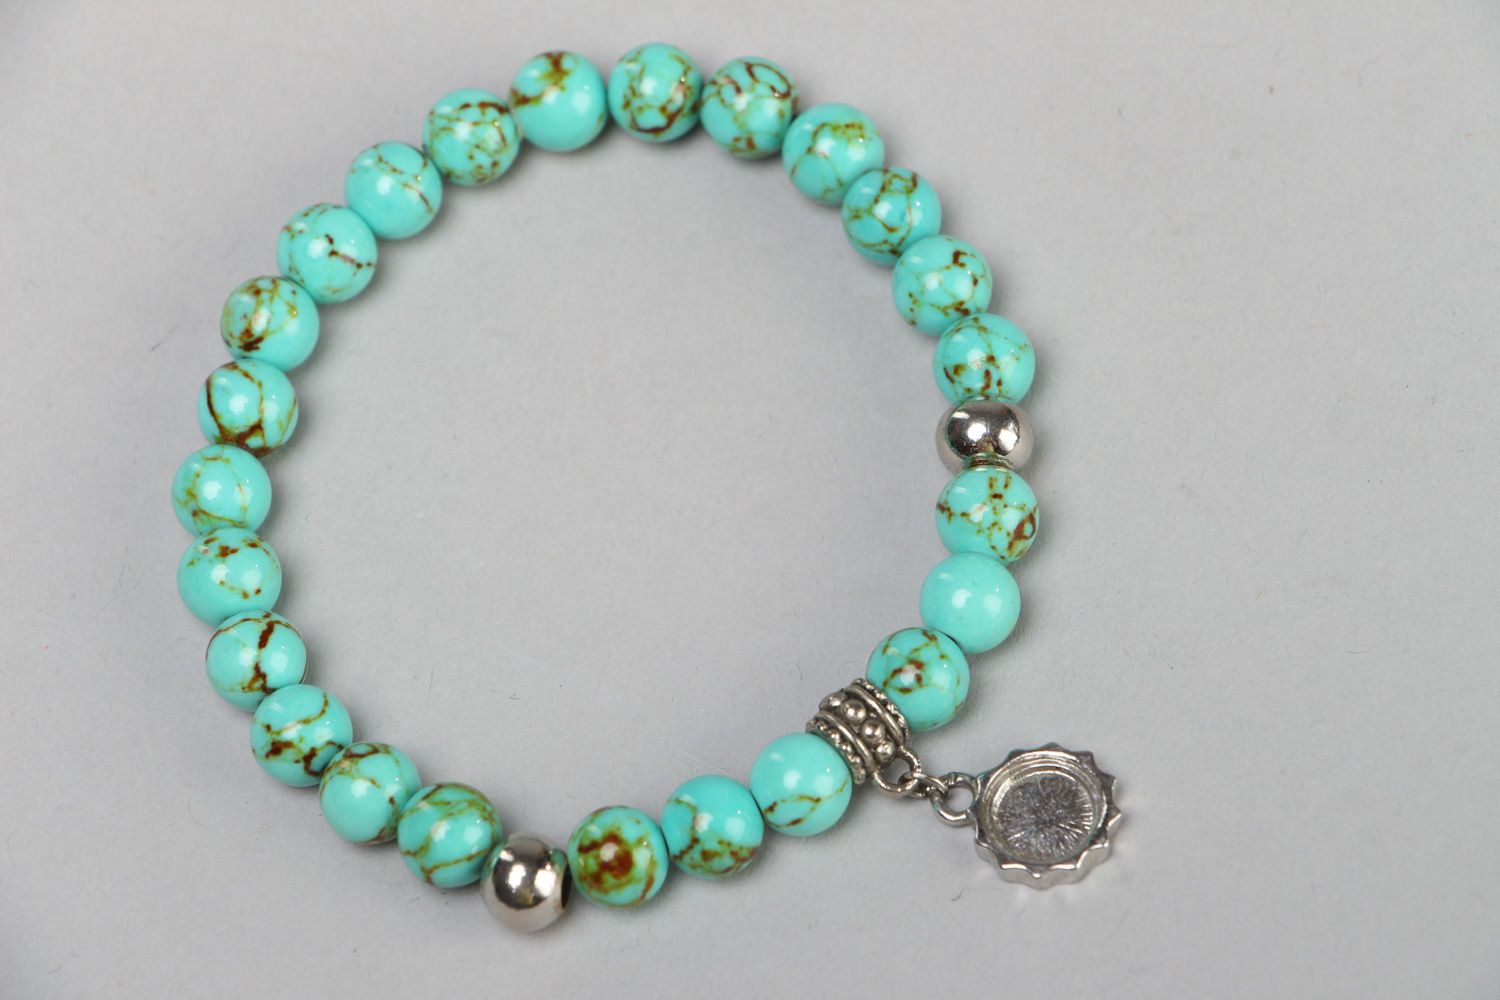 Handmade stretch wrist bracelet with natural turquoise beads and metal charm photo 2